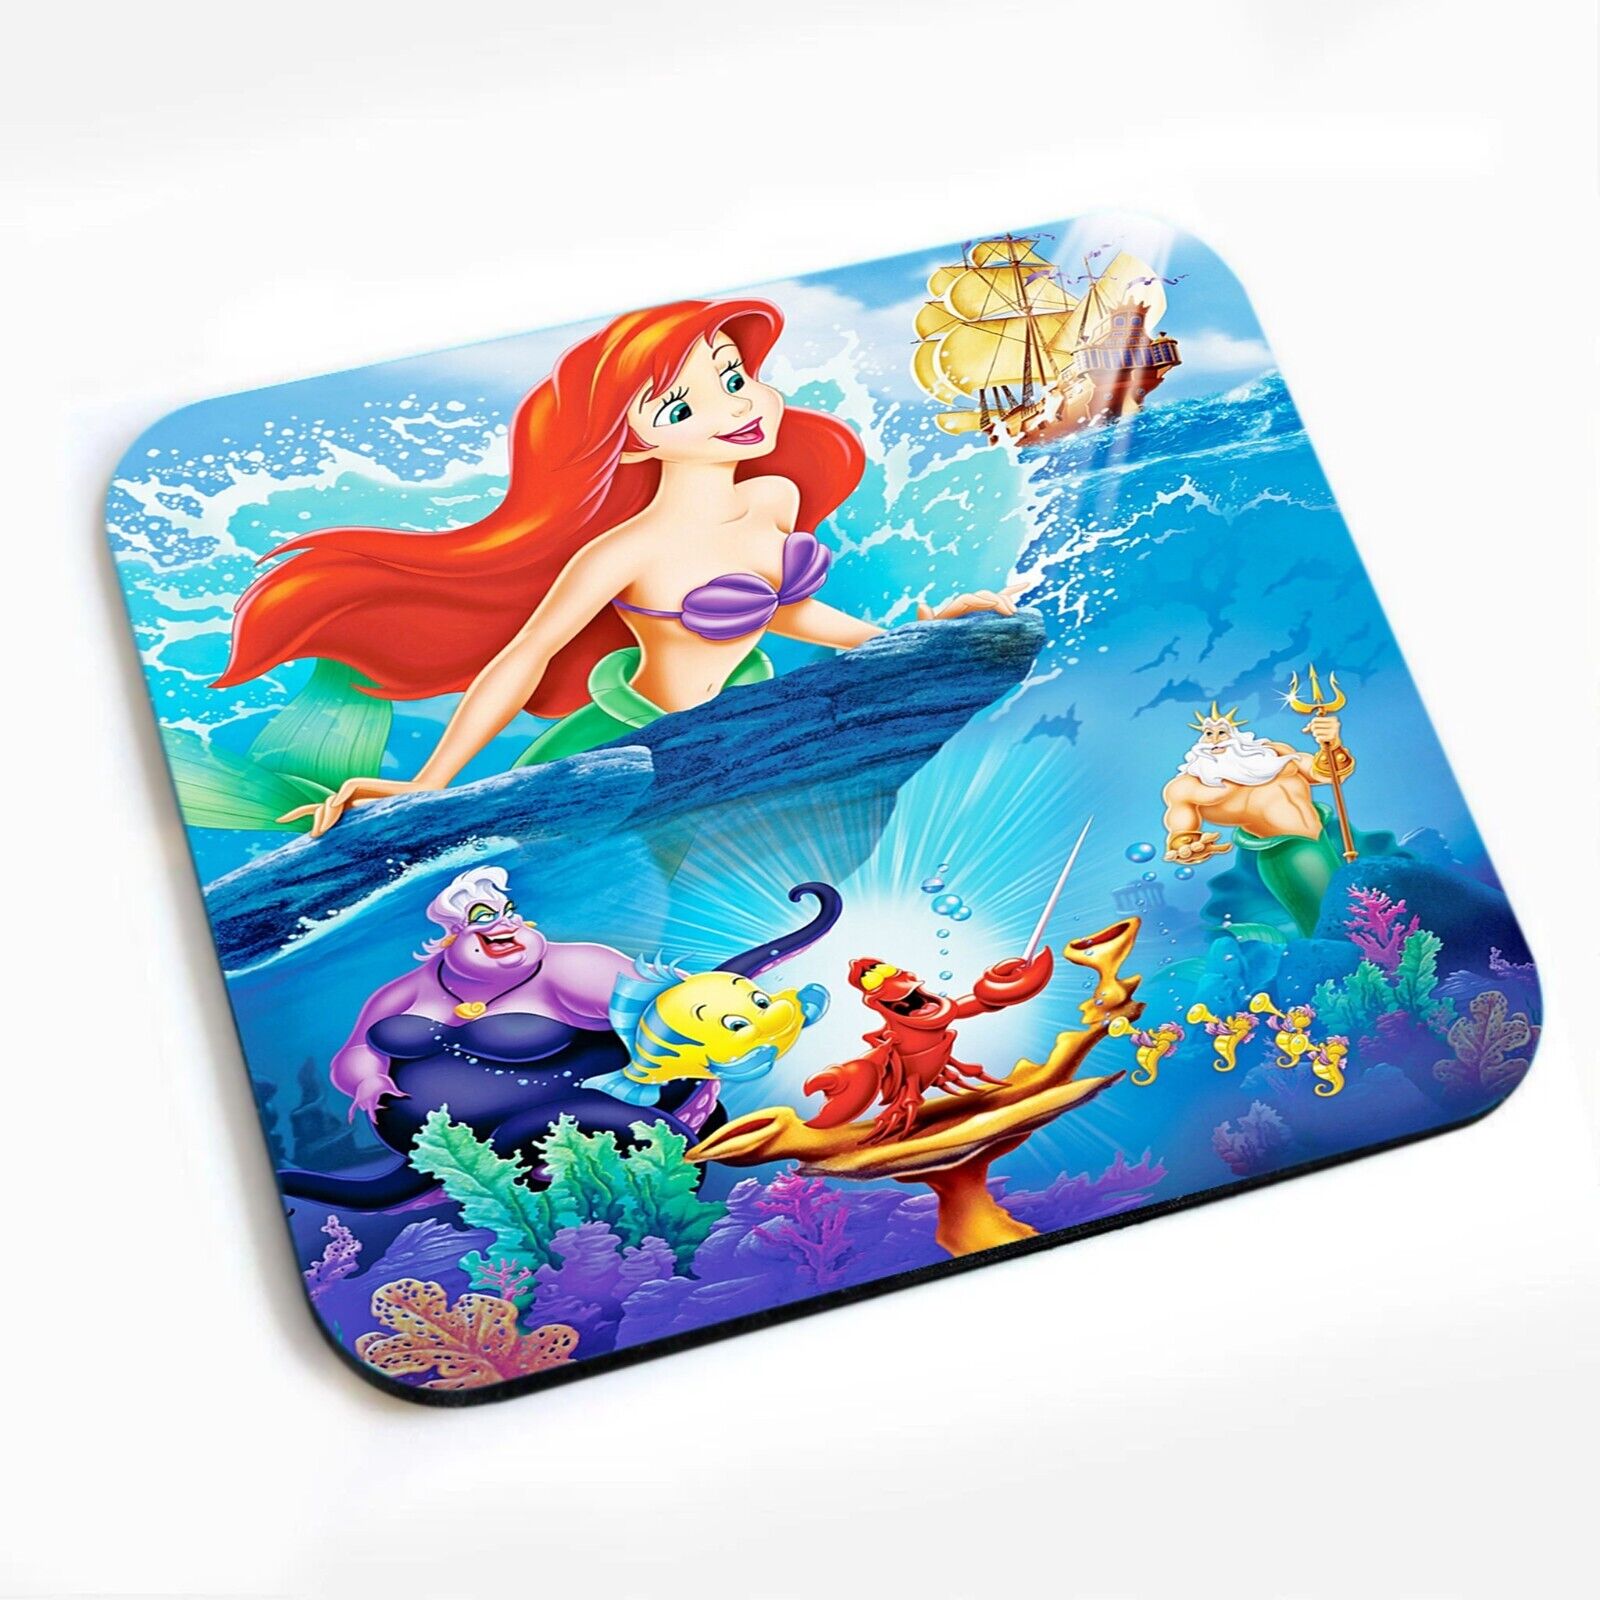 Ariel The Little Mermaid Princess New Gamming Mouse pad L22 Large Mousepad